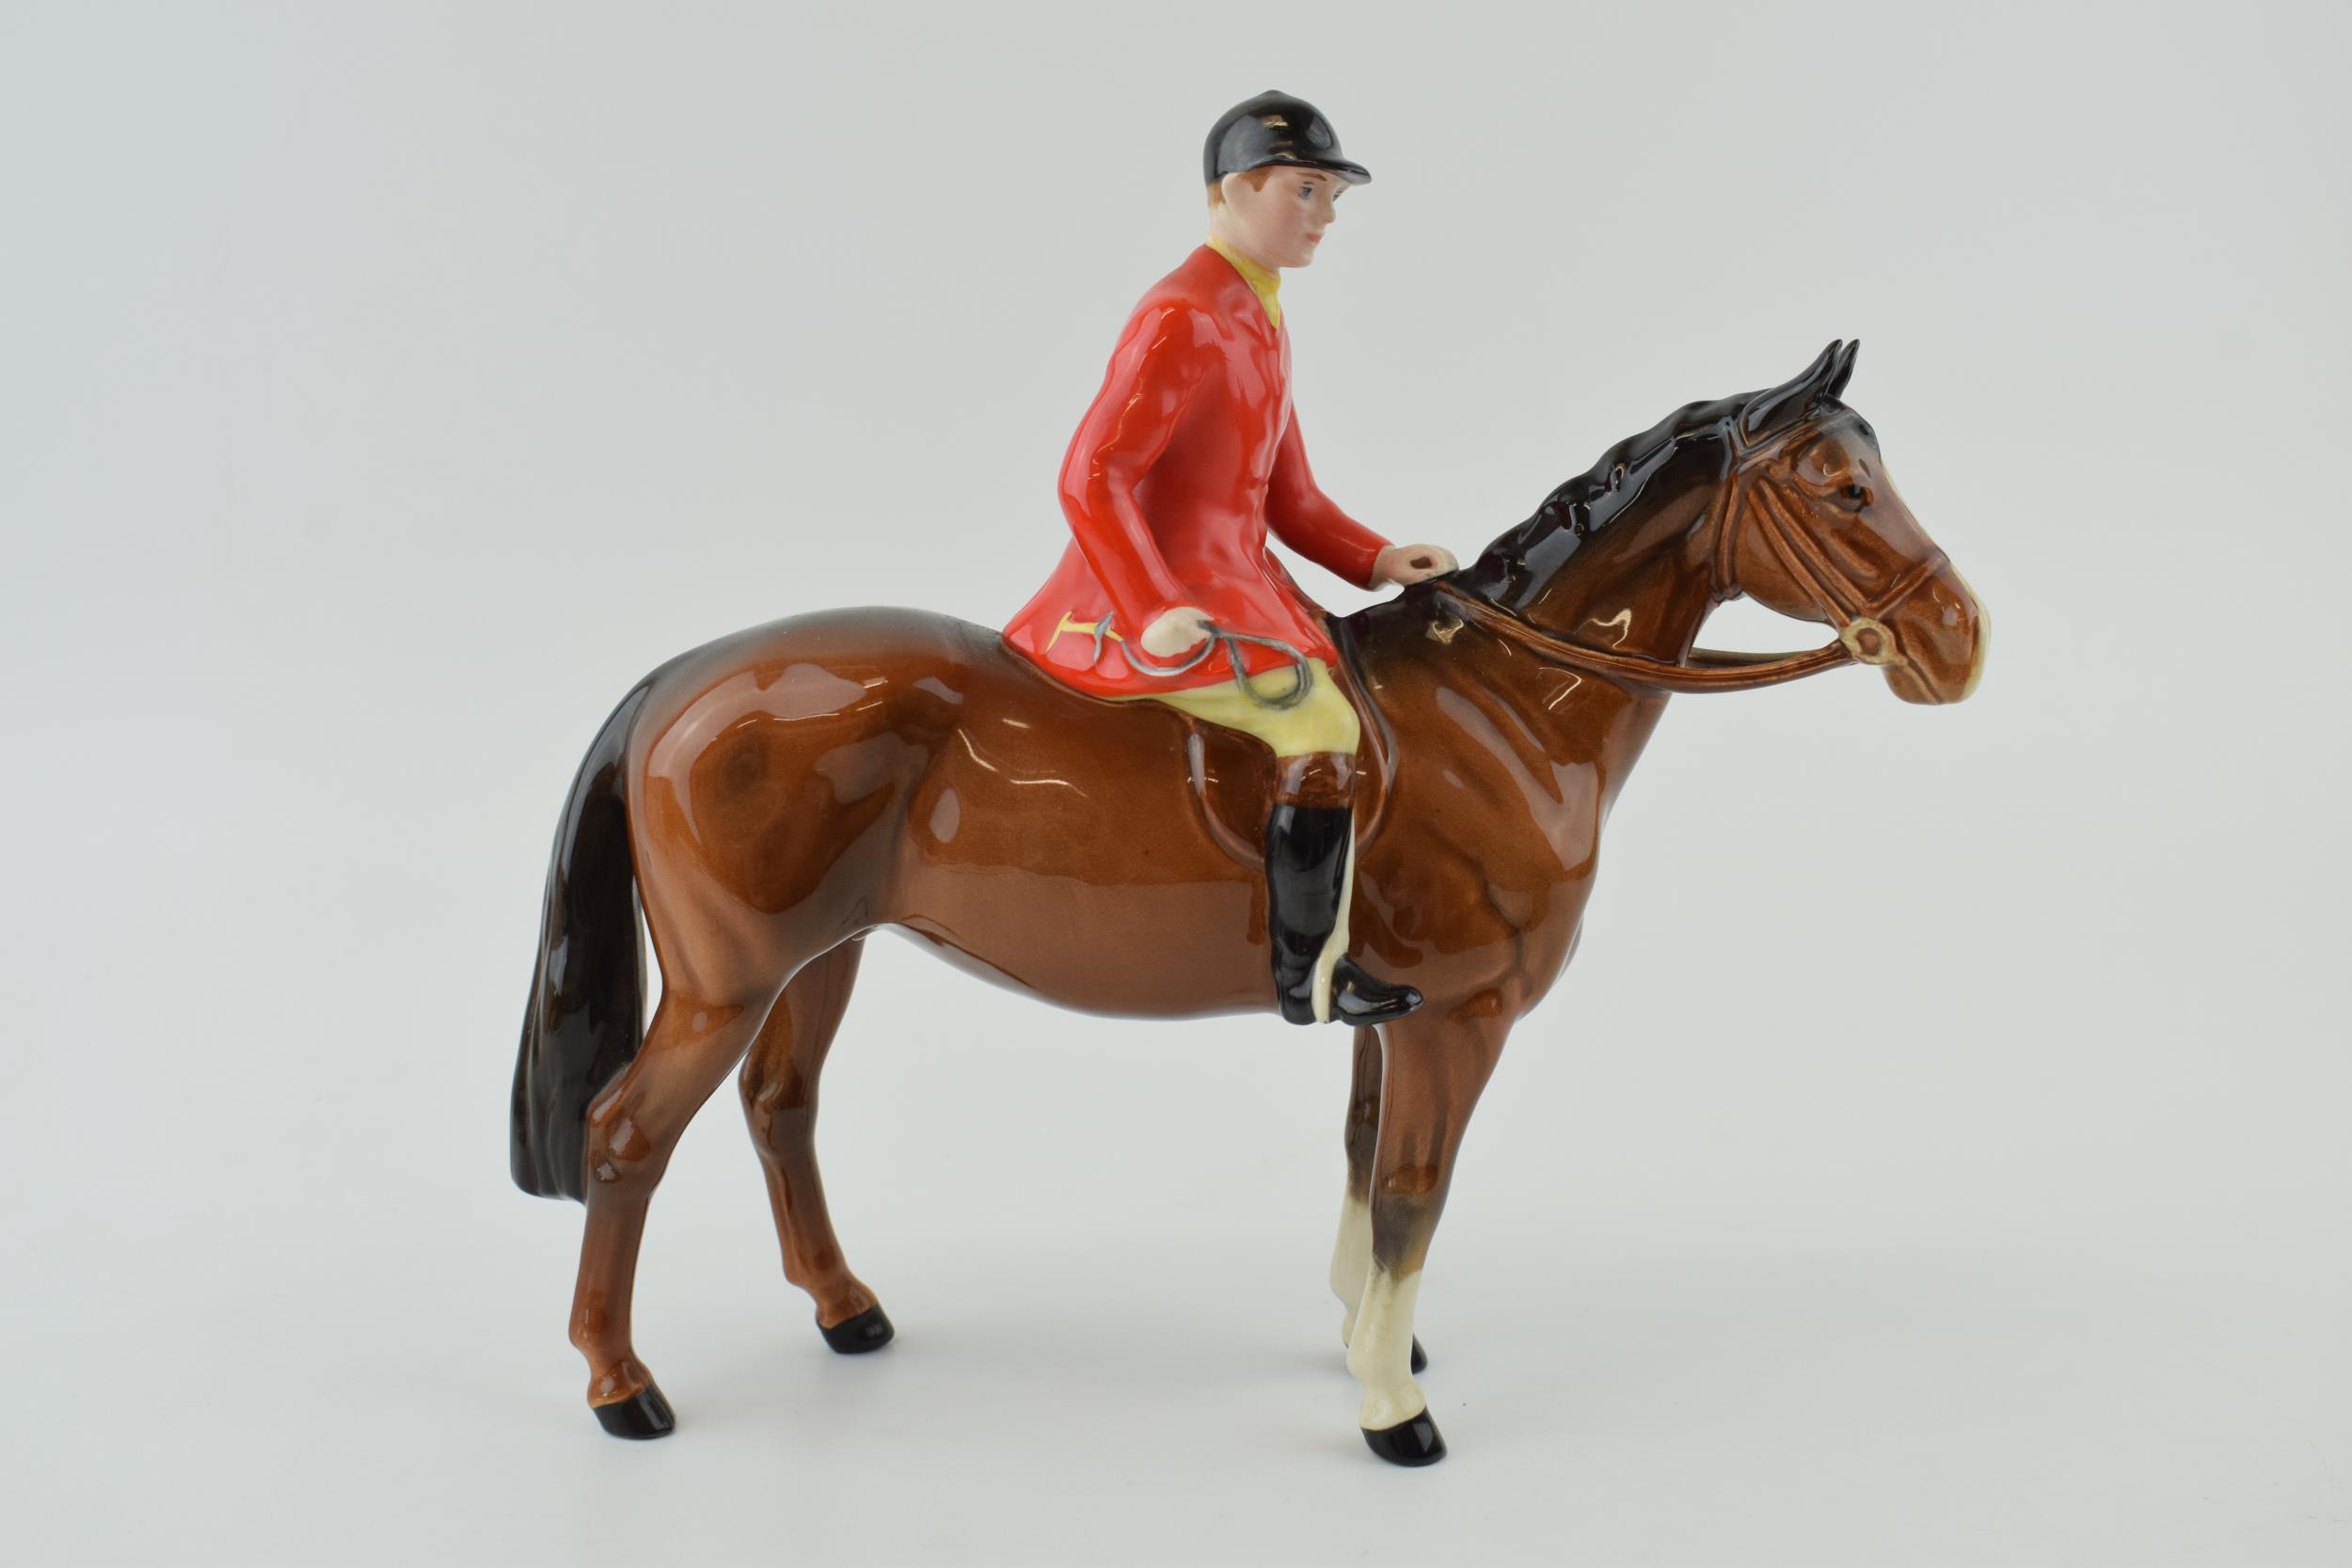 Beswick standing huntsman on brown 1501. In good condition with no obvious damage or restoration.